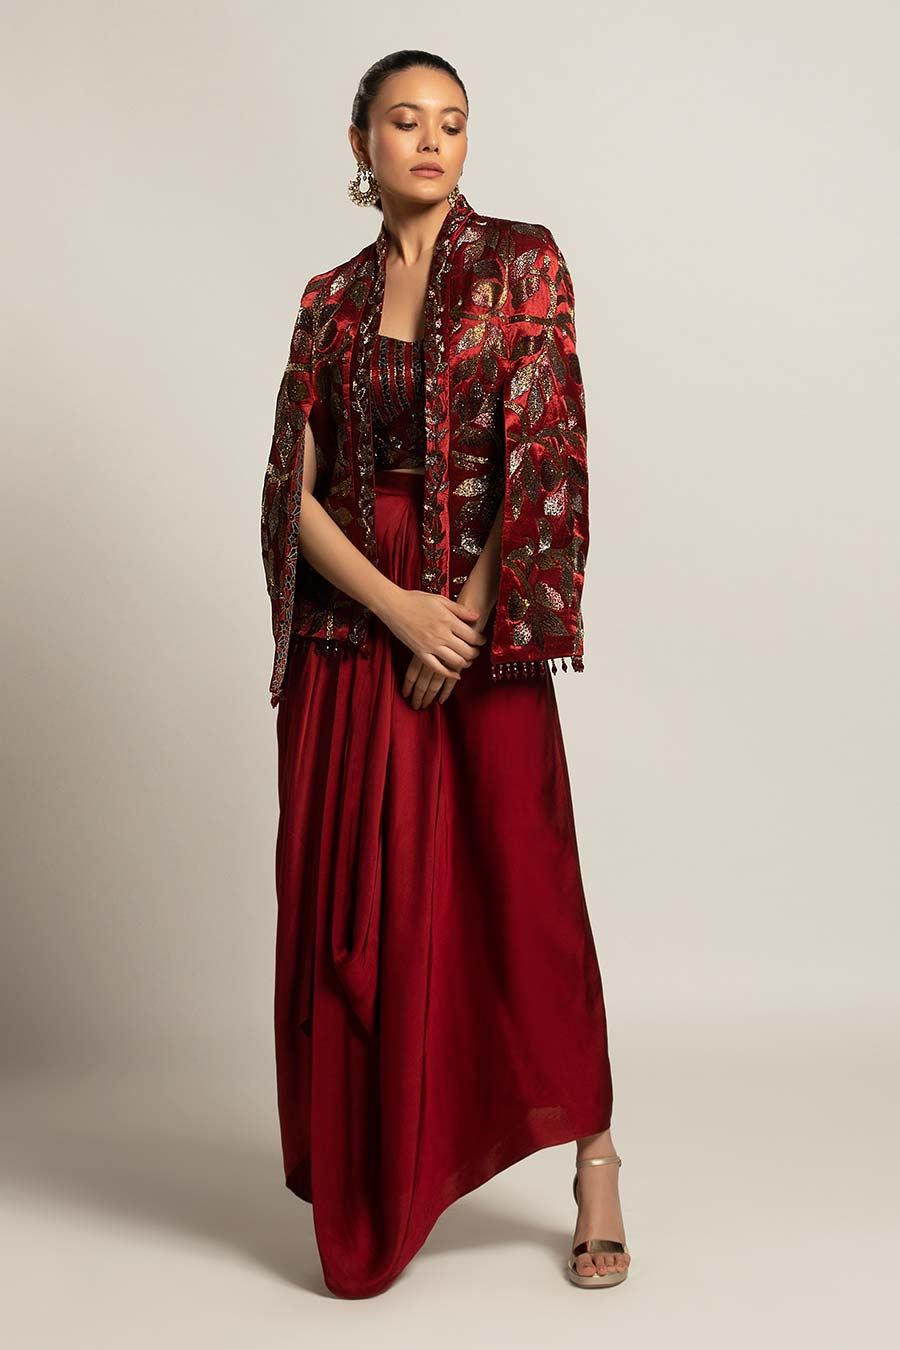 Maroon Rheia Embroidered Co-ord Set with Cape Jacket